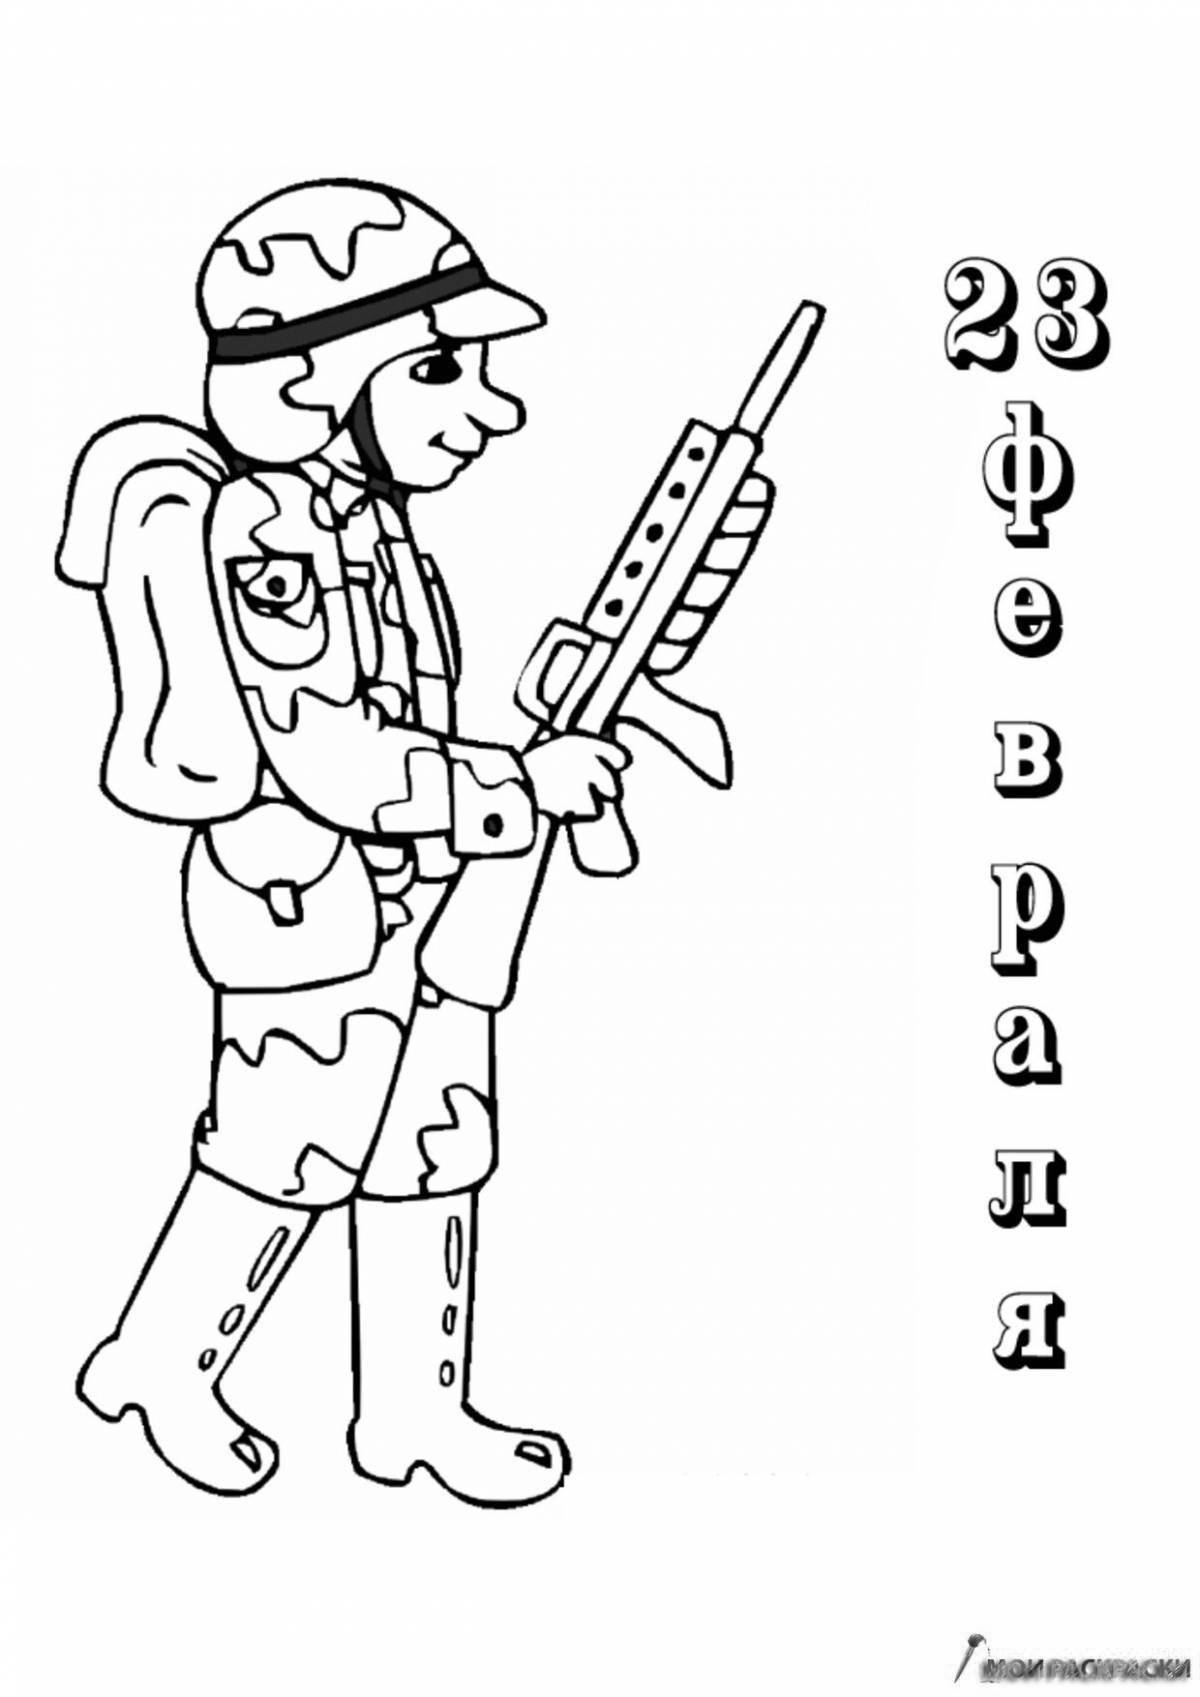 Soldier coloring book for kids